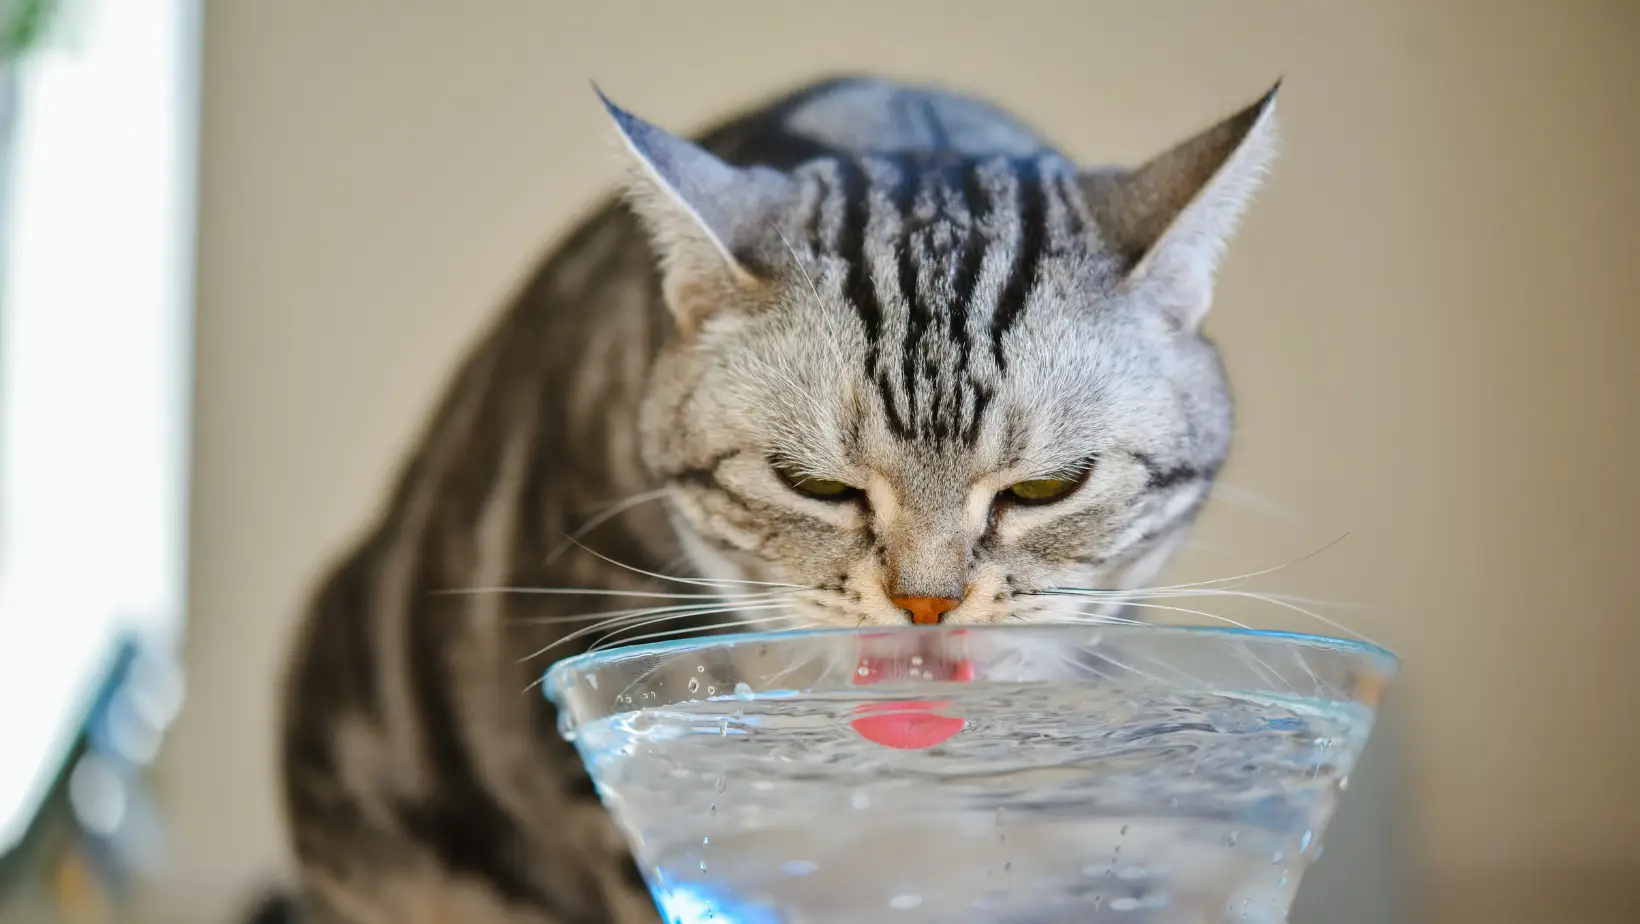 Can Cats Drink Salt Water?